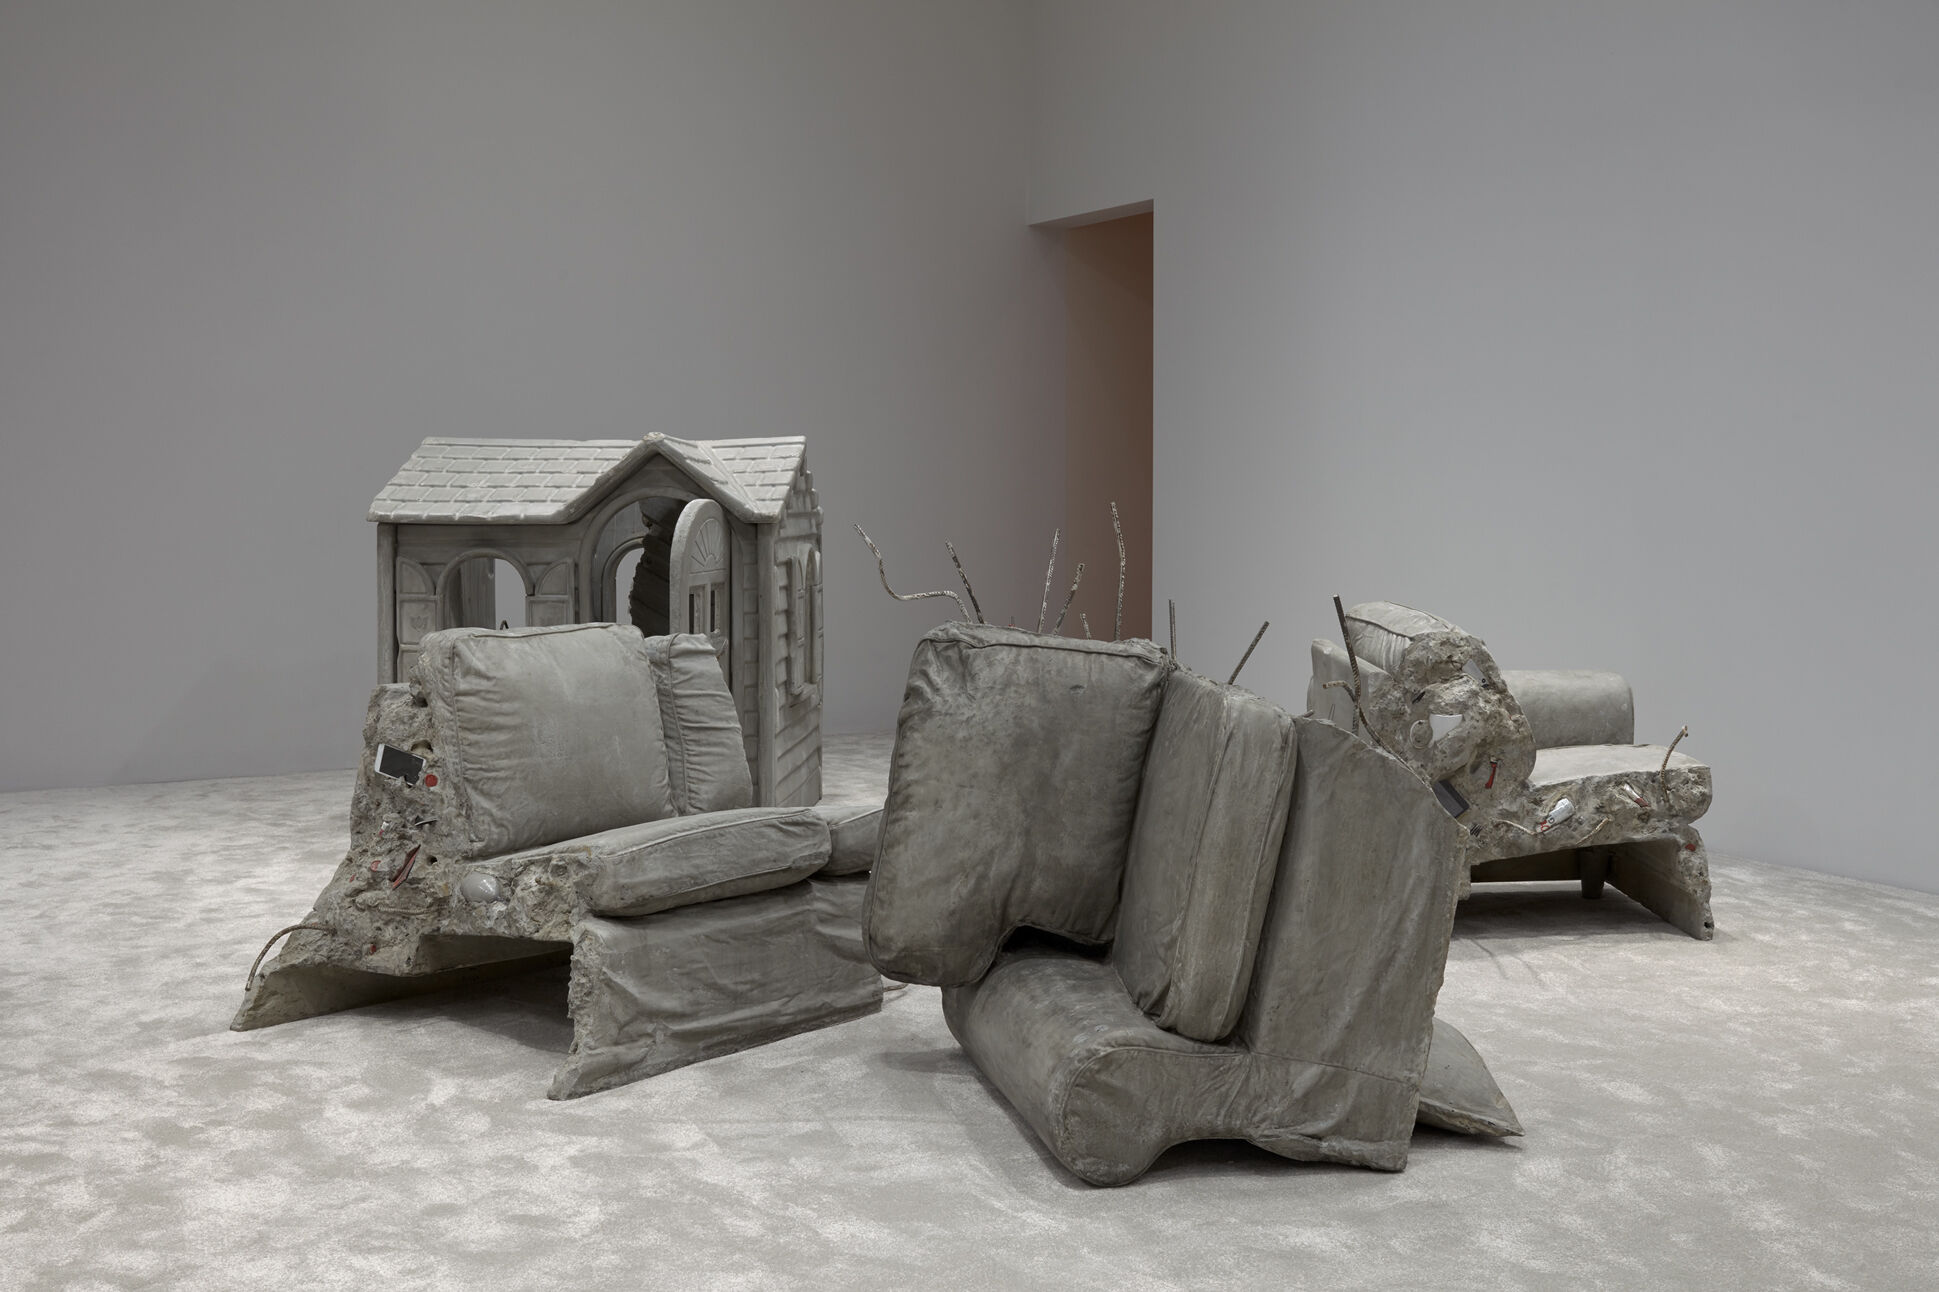 Crumbling casts of furniture made of what looks like concrete as well as the cast of a play house. 